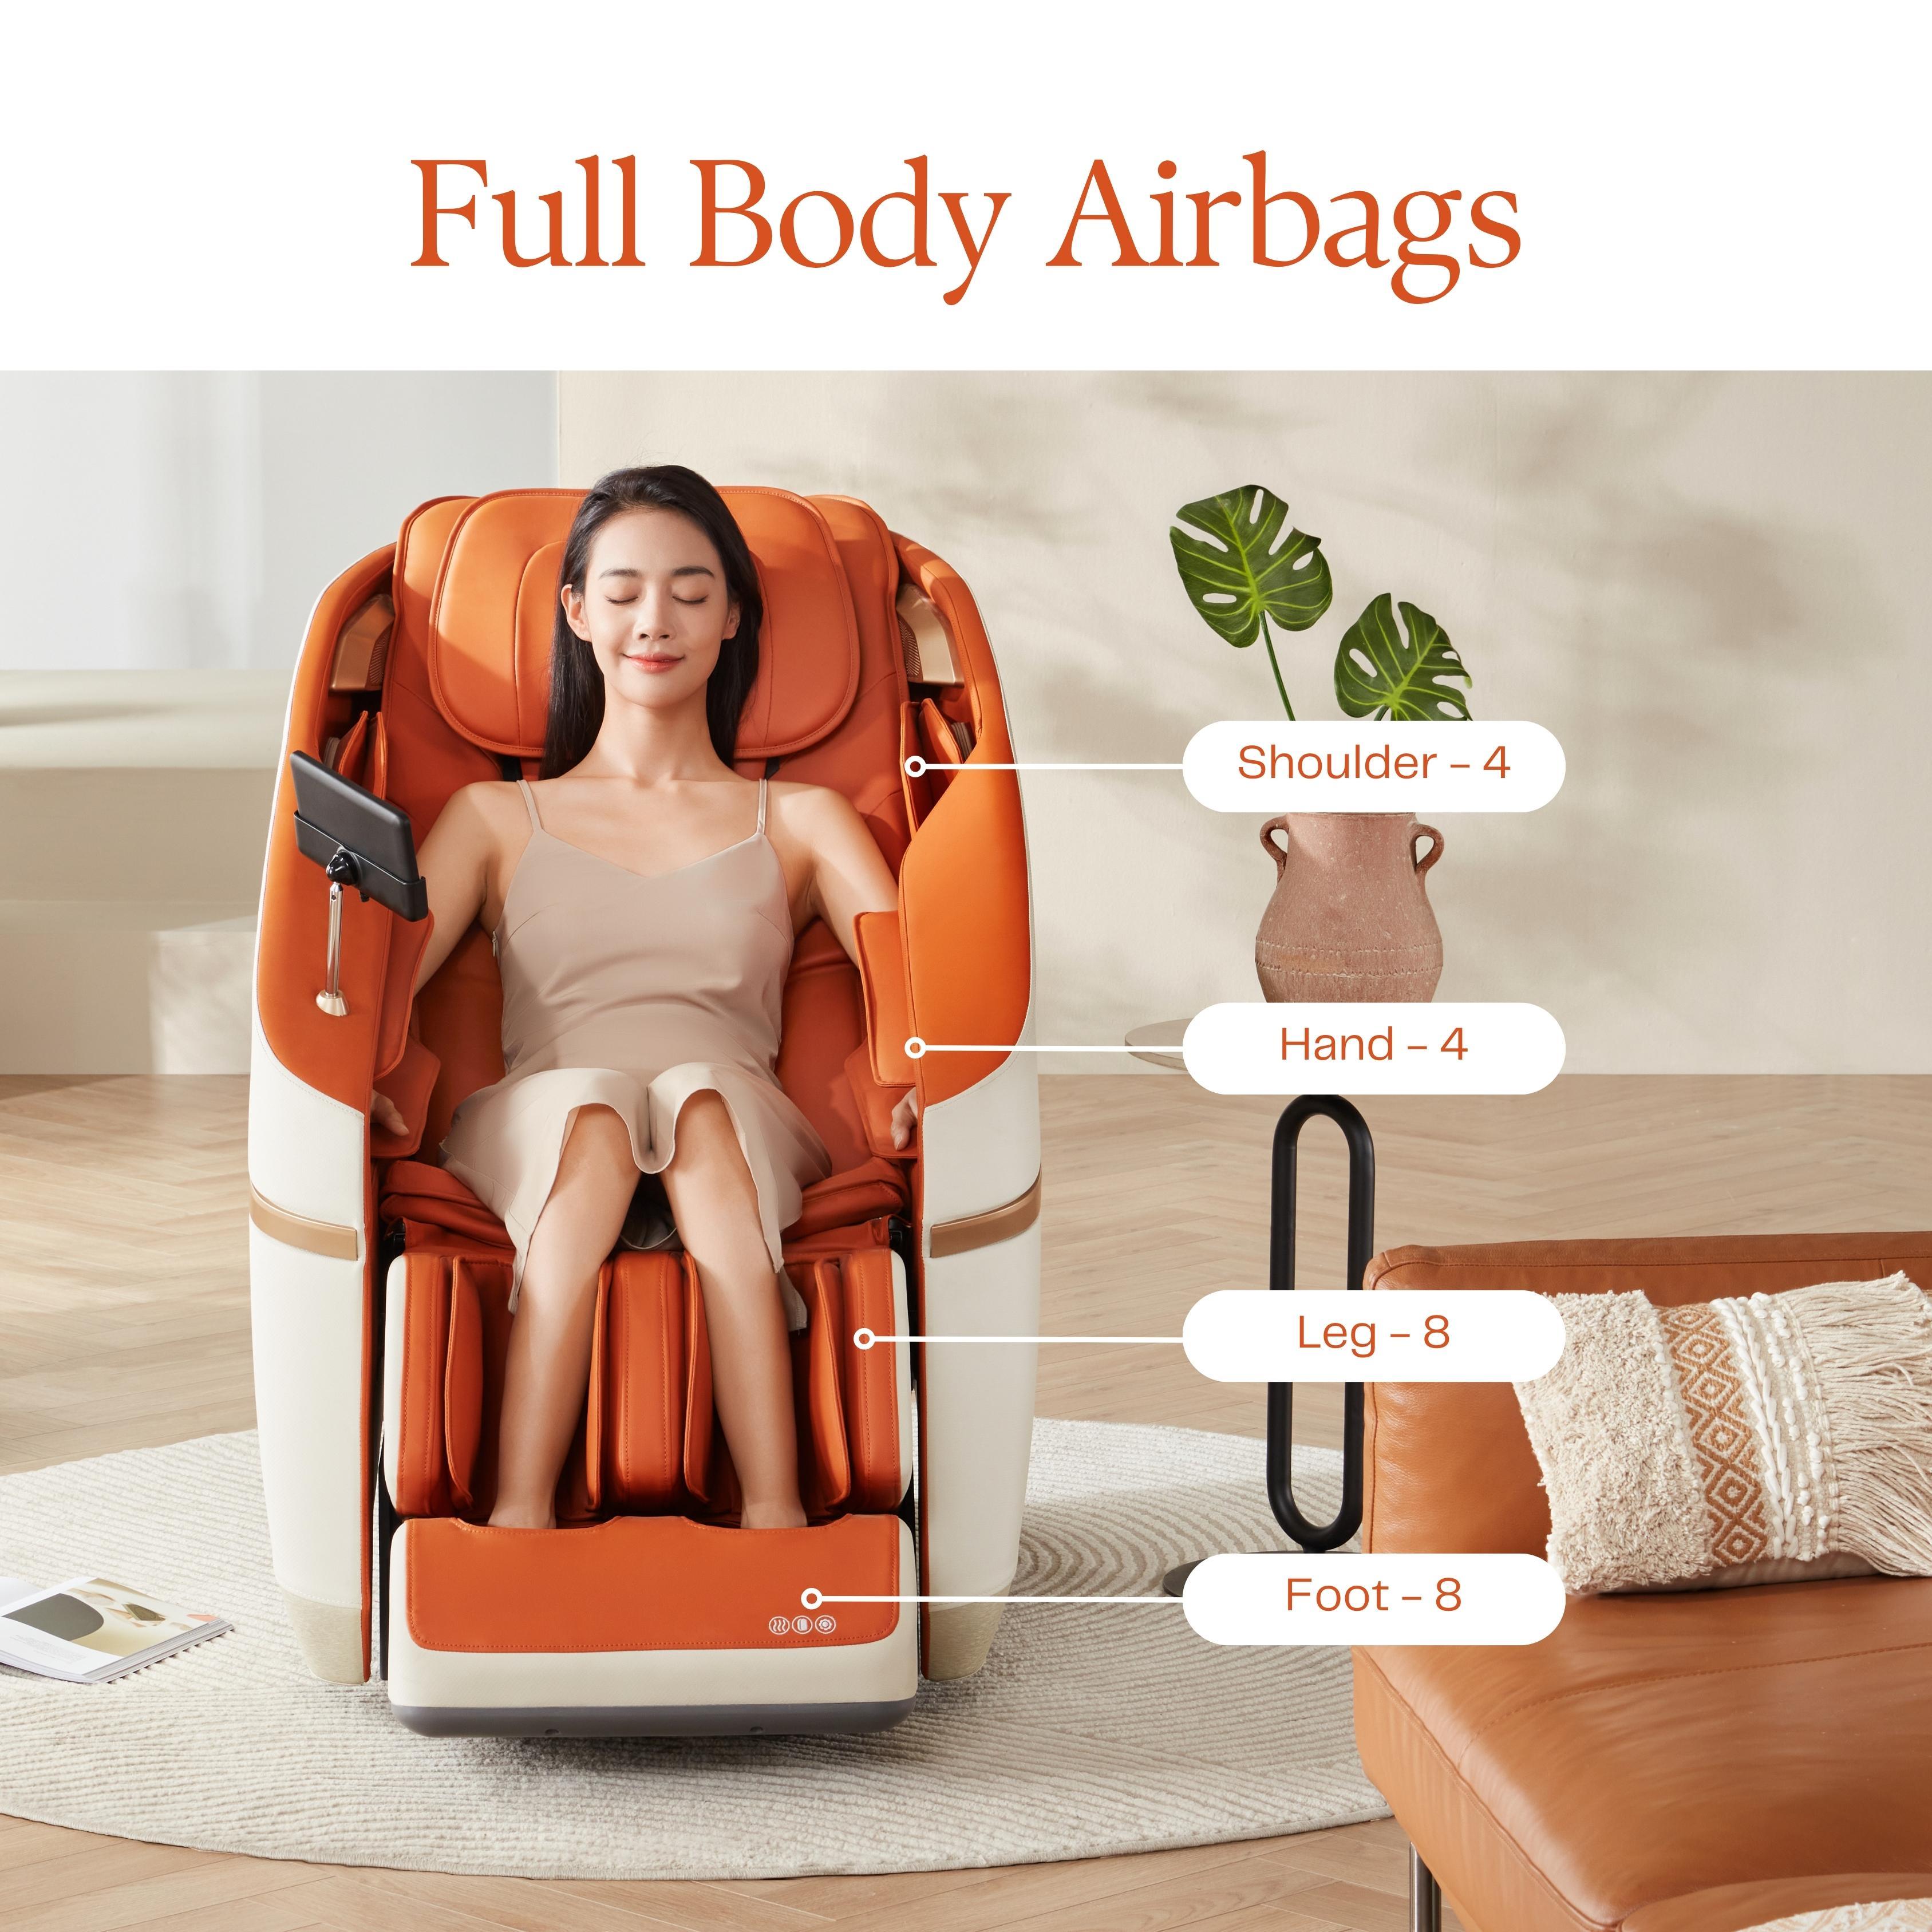 Woman enjoying orange massage chair with full body airbags showing shoulder, hand, leg, and foot massage points.